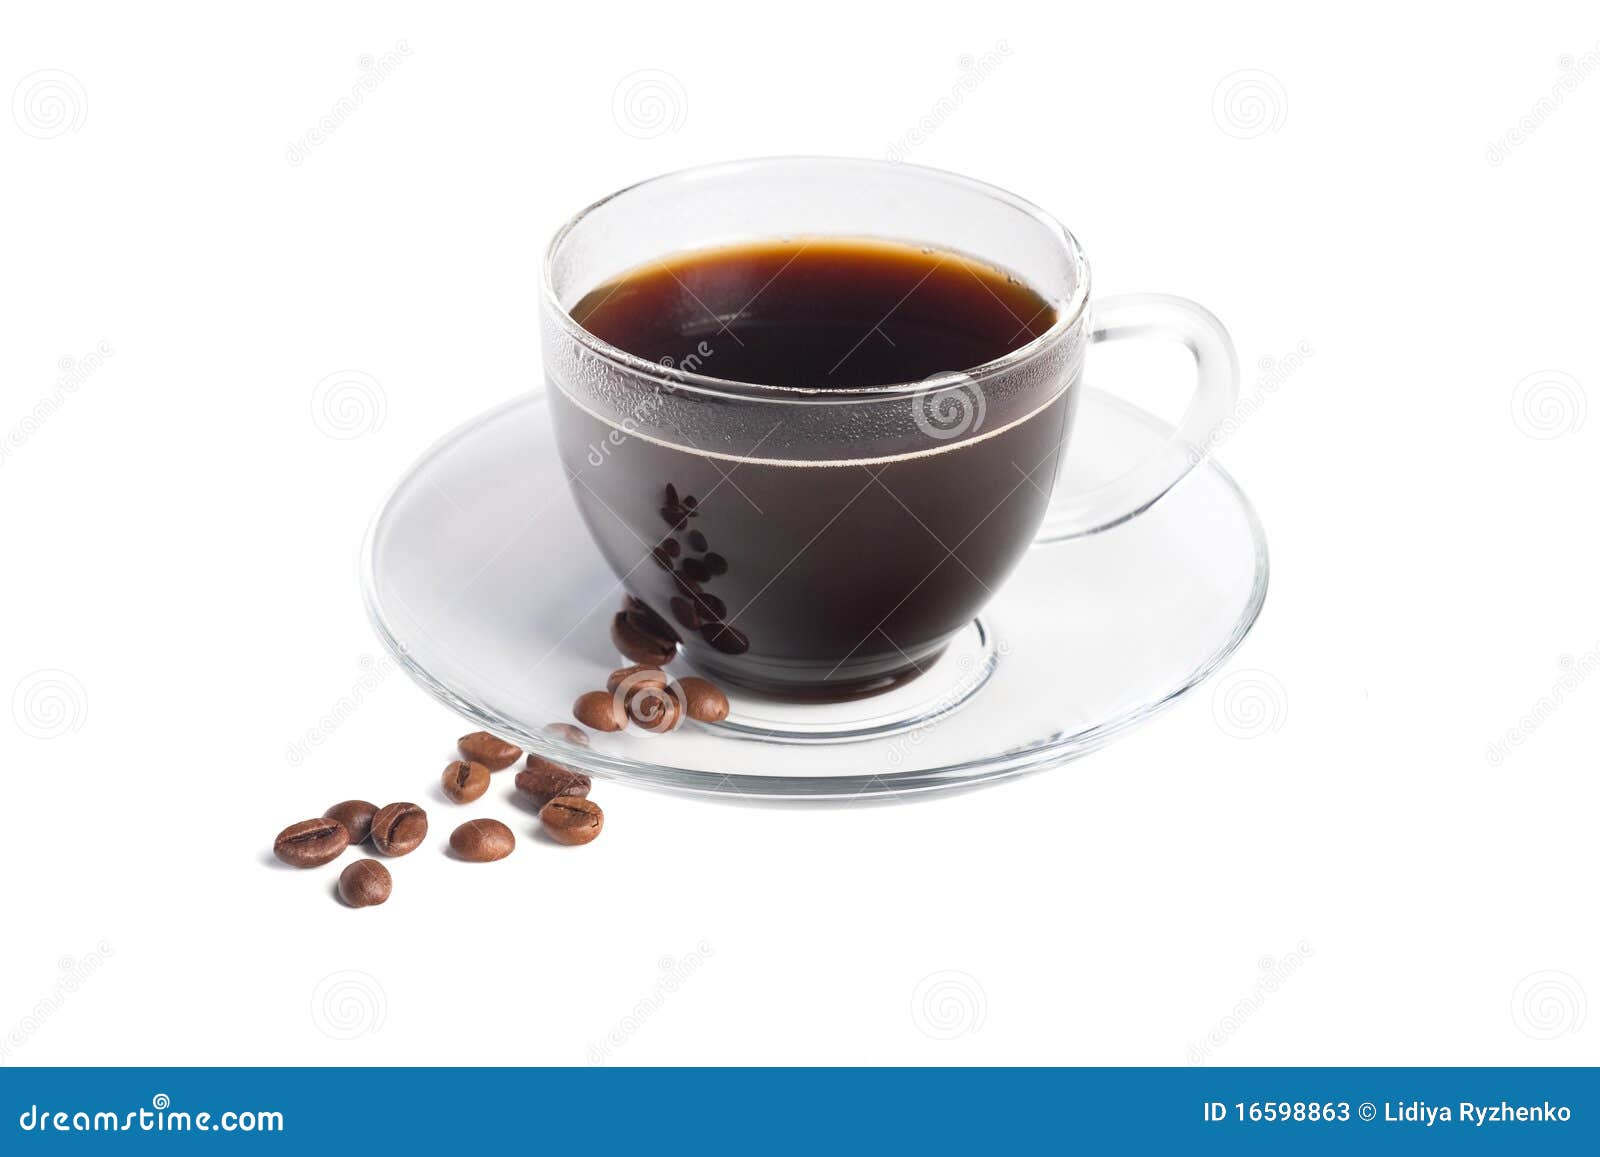 Clear Glass Cup With Black Coffee · Free Stock Photo